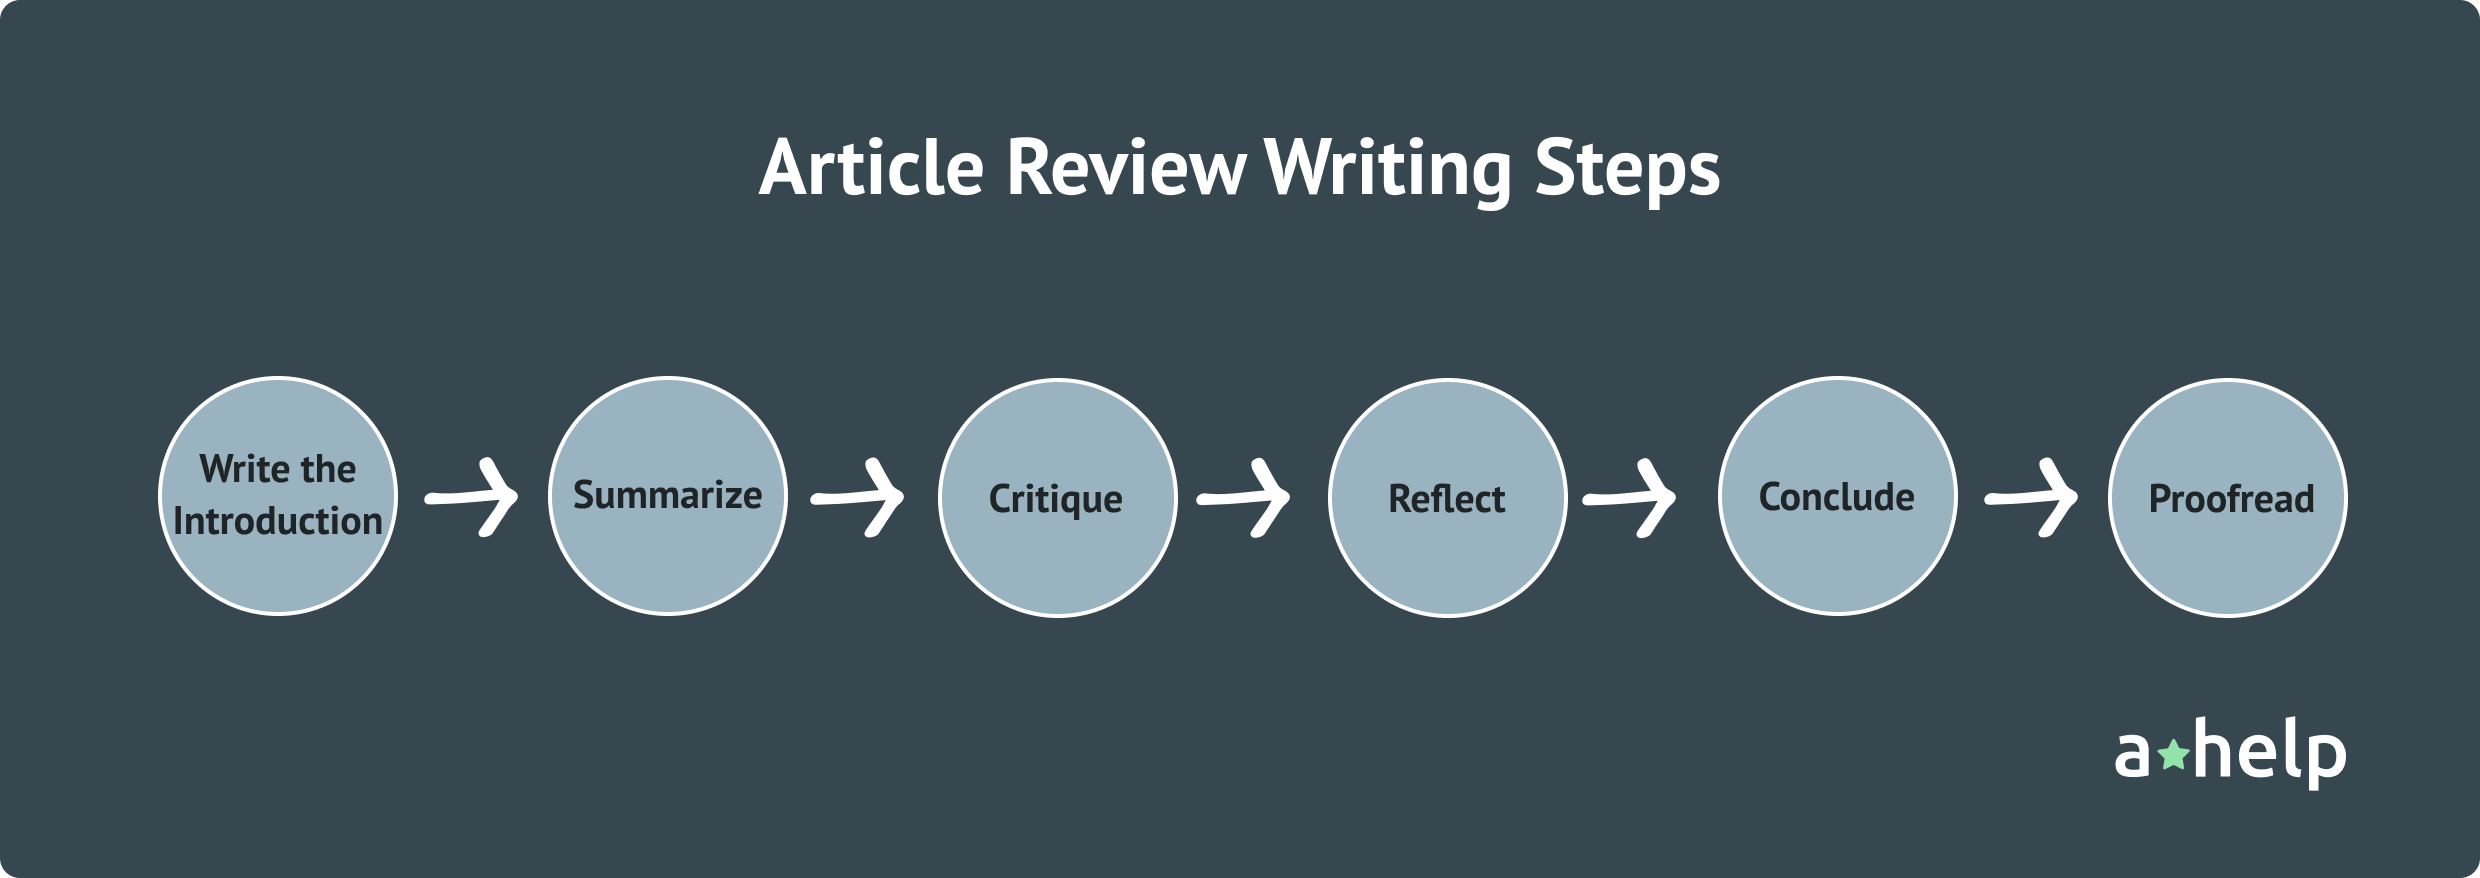 How to Write an Article Review